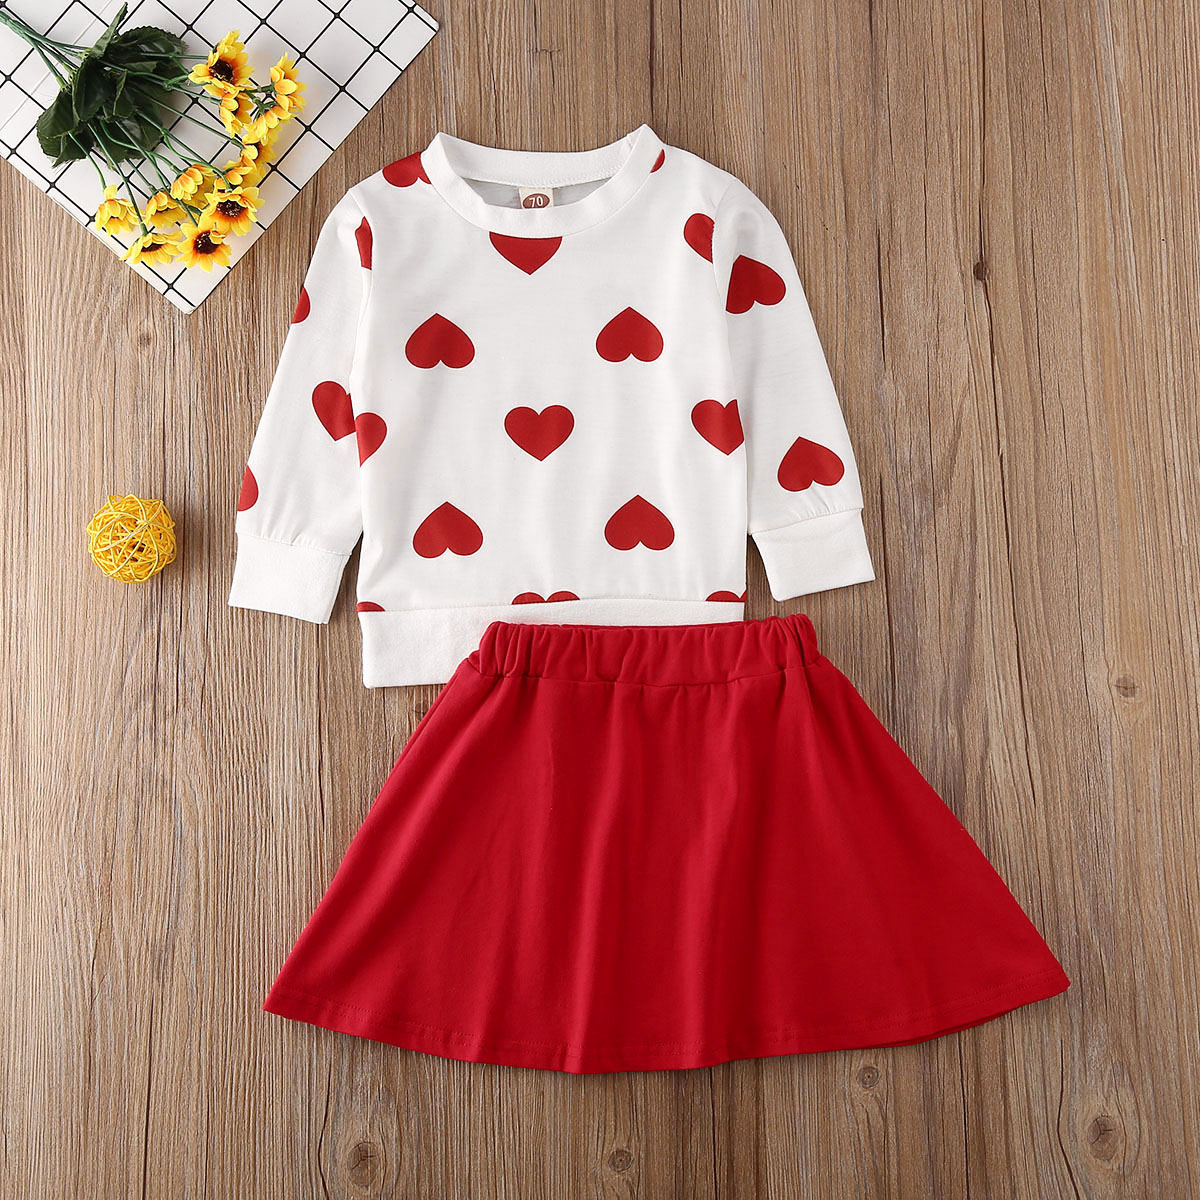 Kids Girl Valentine's Day Outfits Toddler Baby Long Sleeve Heart T ...